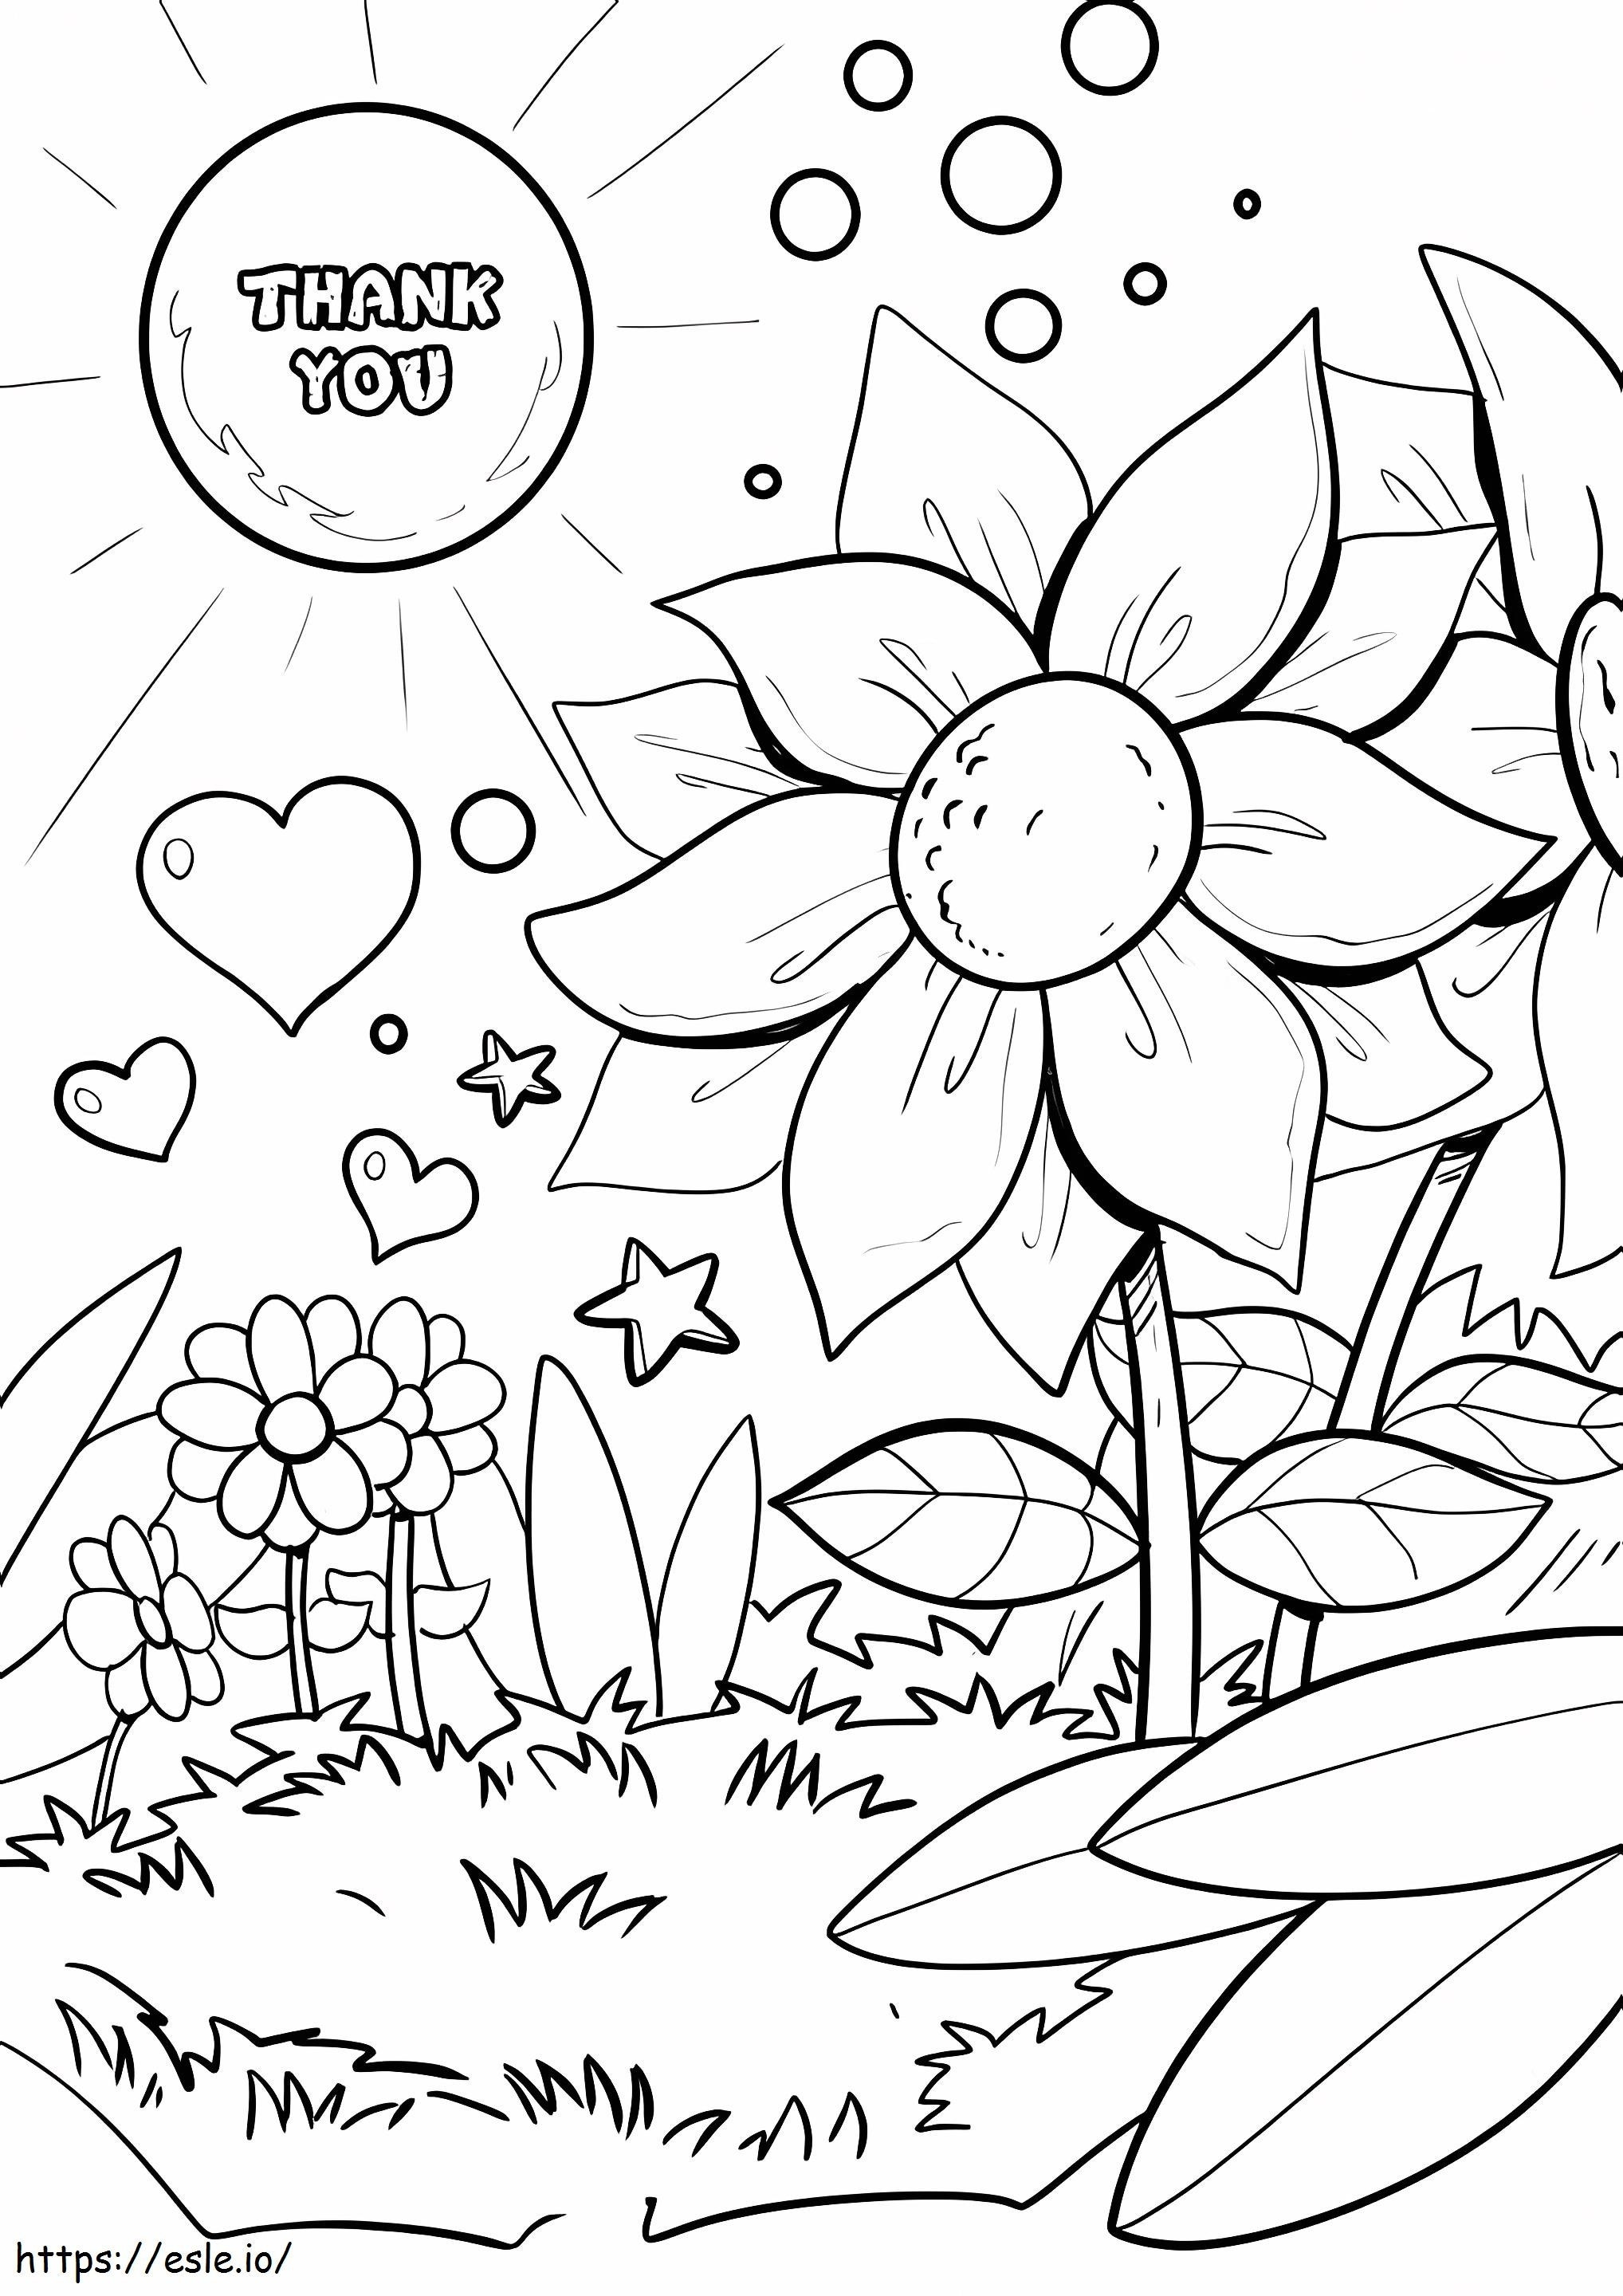 Good Thank You coloring page